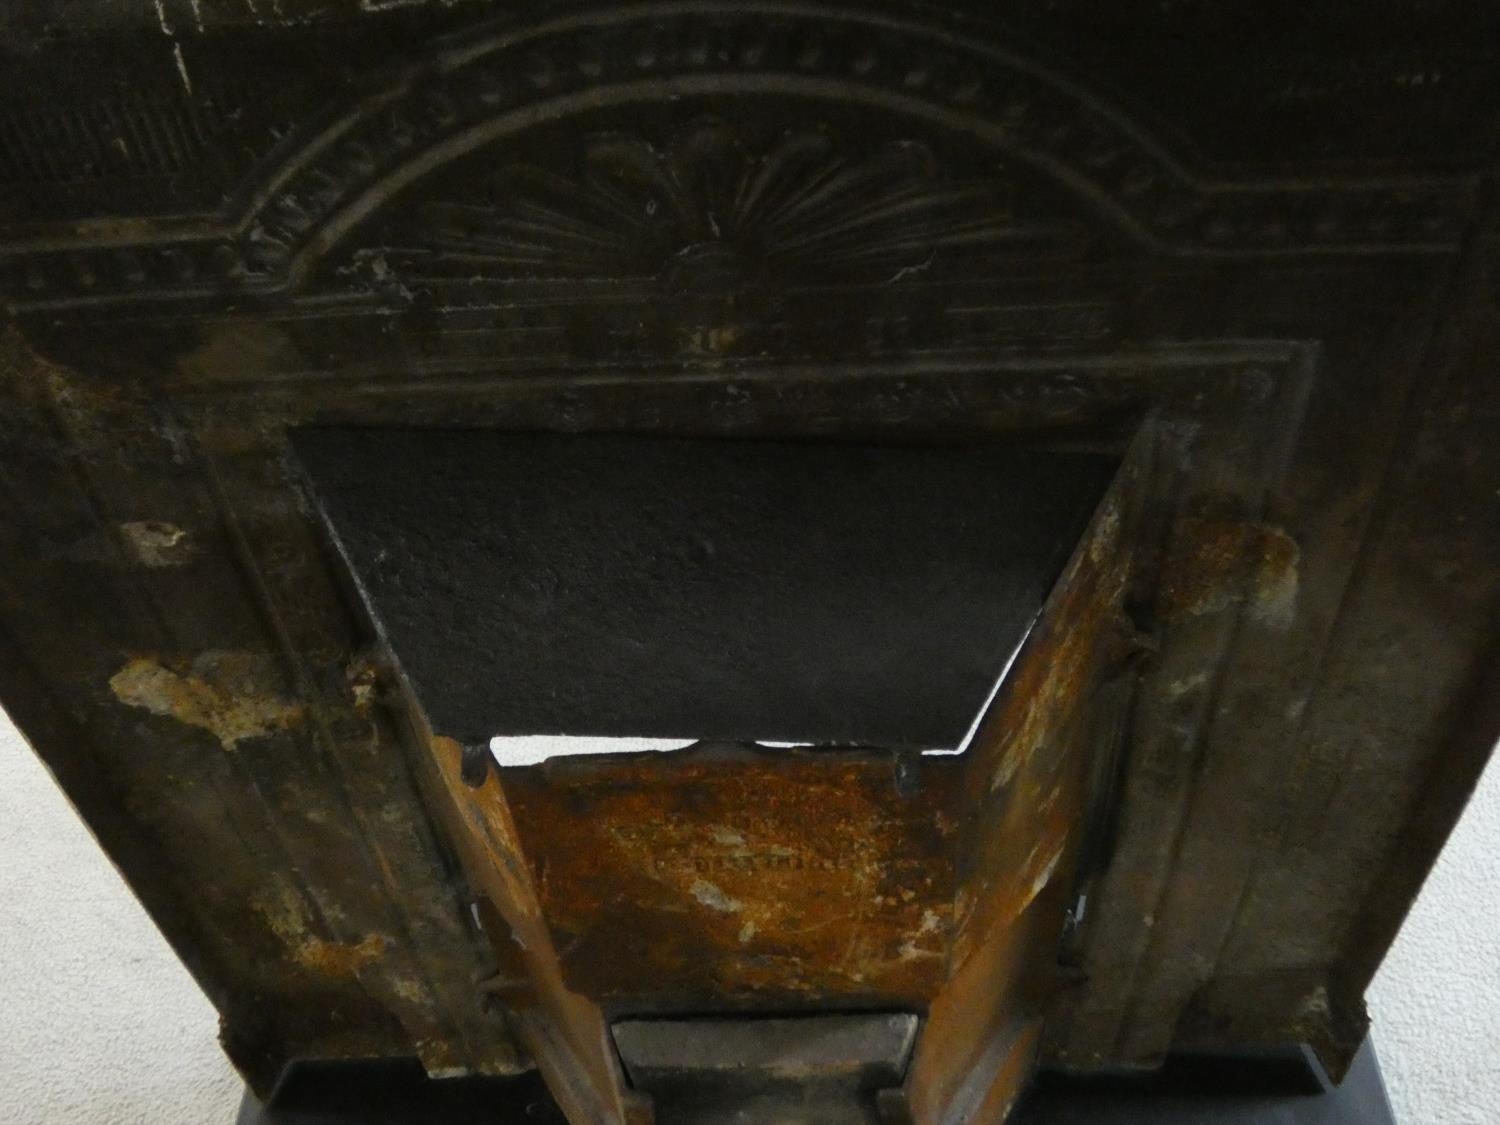 An ornately cast 19th century iron fire surround, mantel shelf and insert with grate on marble - Image 8 of 12